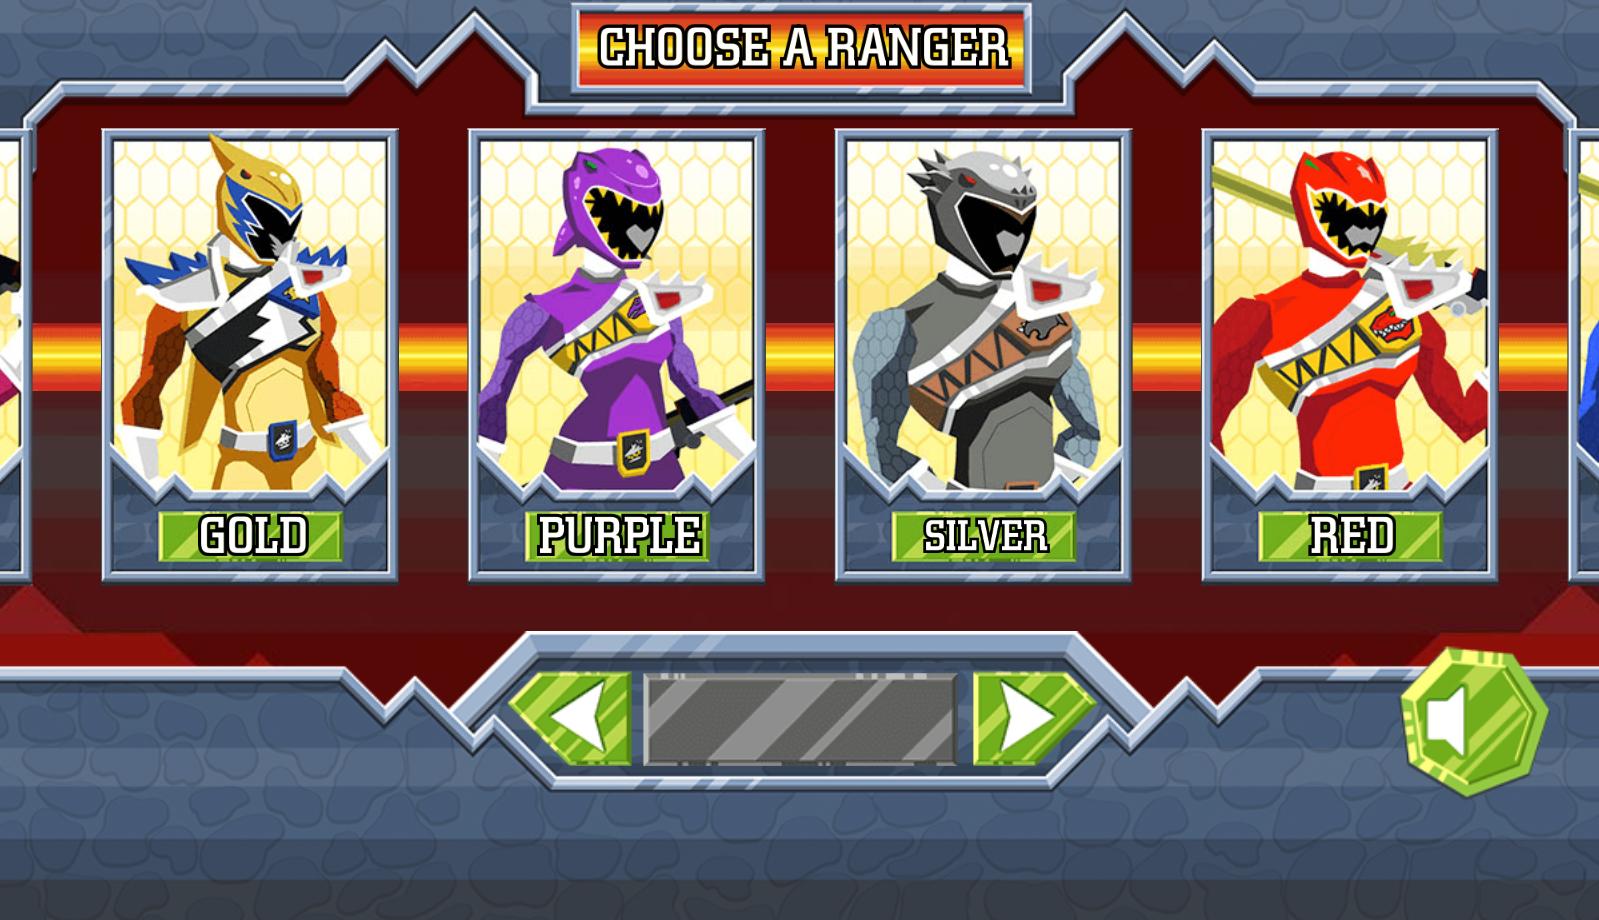 Demo for Power Rangers Unleash Dino Charge for Android - APK Download